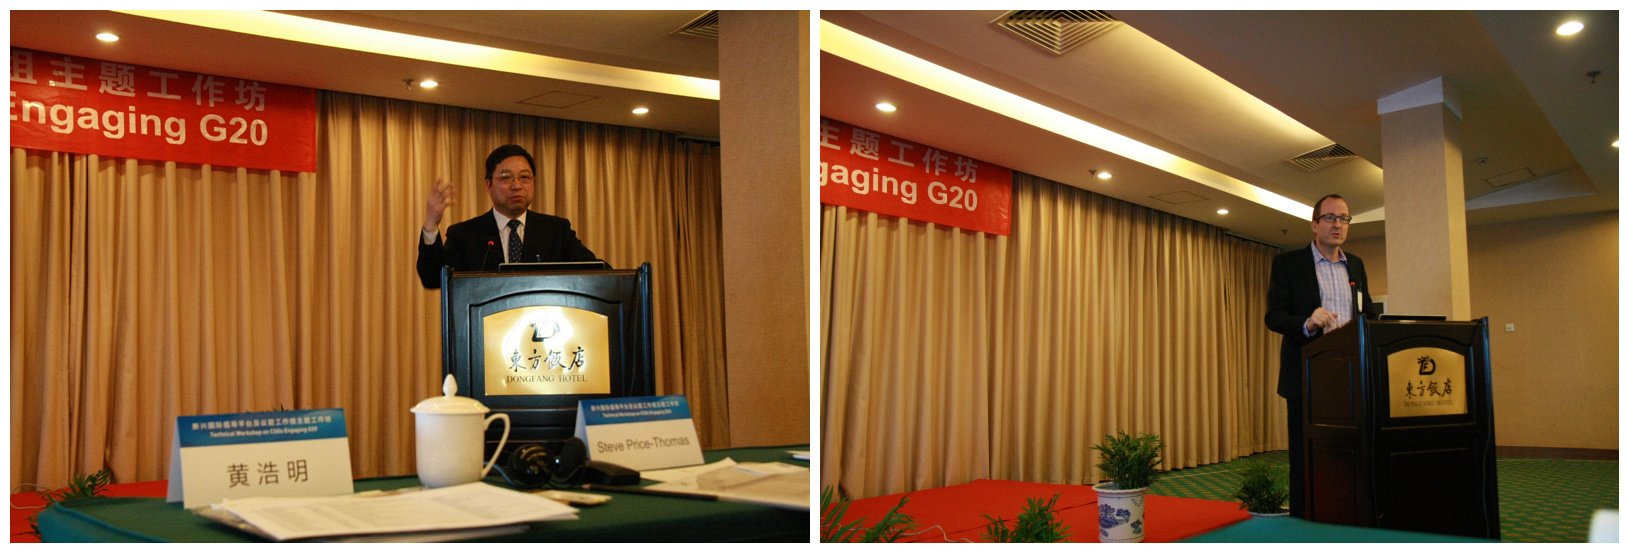 Technical Workshop Held in Beijing for Chinese CSOs Engaging with the G20